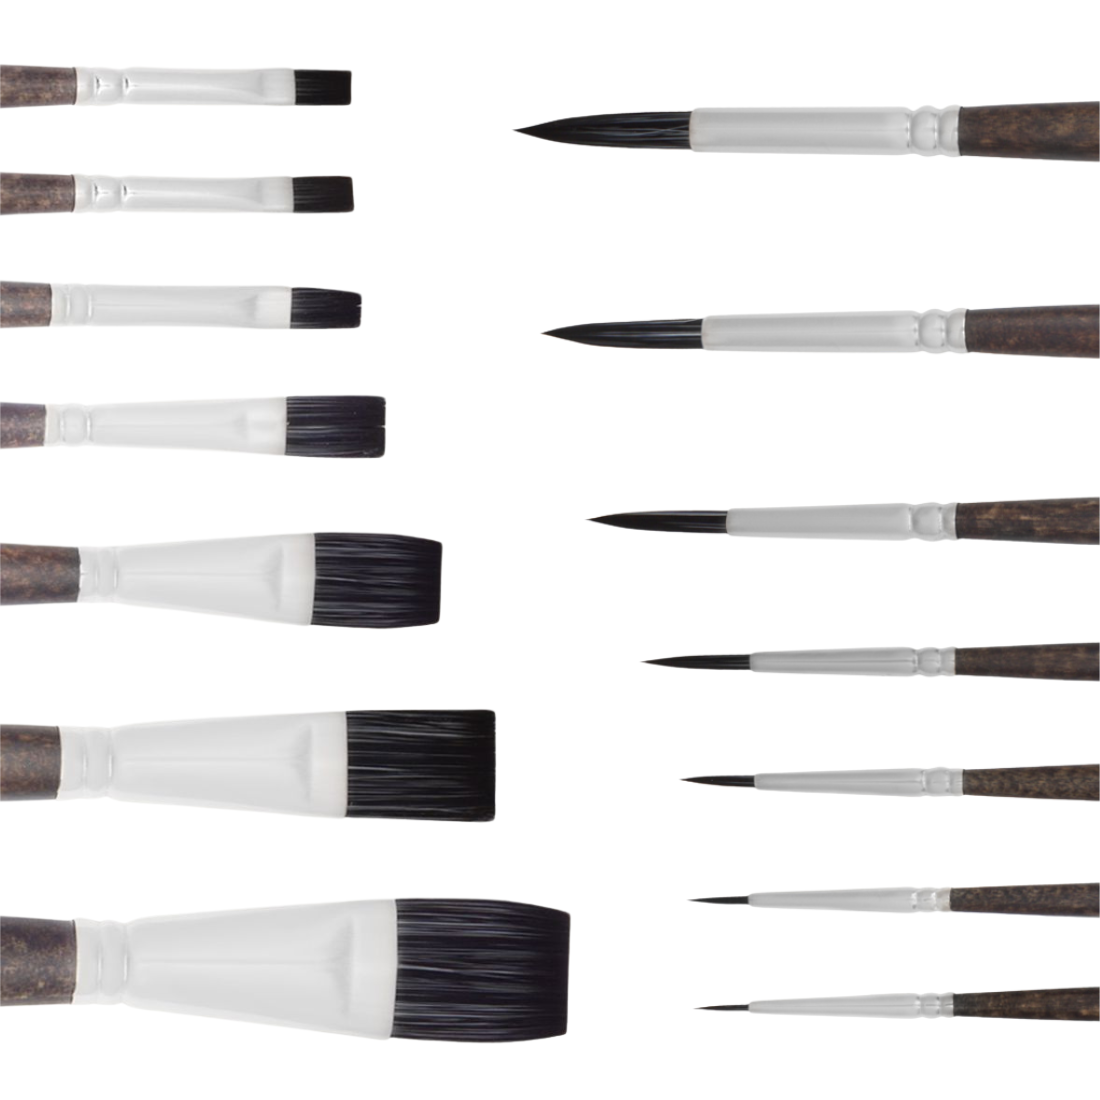 Set of 2, 7 Round and 7 Flat Brushes, Synthetic bristles for Oil, Acrylic, Gouache Painting